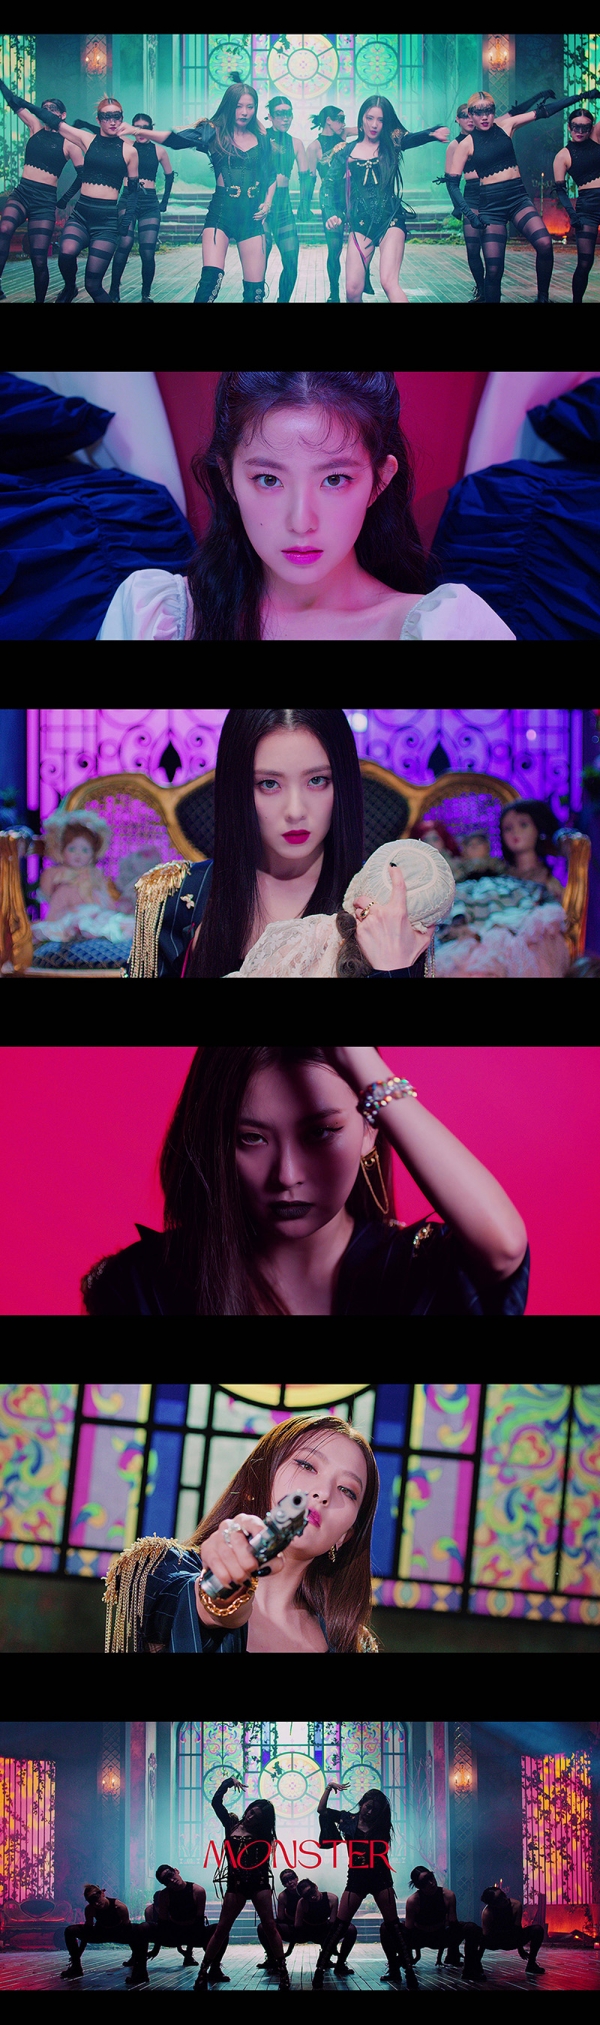 Red Velvet - Irene & Seulgi (Red Velvet - IRENE & SEULGI; Irene & Seulgi, SM Entertainment)s first Mini album title song Monster (Monster) music video teaser video has been released.Monsters first music video teaser video, which was released on YouTube and Naver TV SMTOWN channels on the 3rd, caught the attention of the audience because it was able to meet the intense performance combined with intense music and the charismatic appearance of Irene & Seulgi.In addition, at 12 oclock tonight, the second music video teaser video of Monster, which features a different visual of Irene & Seulgi, which has transformed into a new album concept in a colorful background, will be released, which is expected to raise expectations for new songs to the highest level.Irene & Seulgis first Mini album, released on July 6, features six songs from various genres, including the title song Monster, and includes Yoo Young-jin, Kenji (KENZIE), Moonshine (Moonshine), Daniel Obi Klein (Daniel Obi Klein), Andreas Oberg (Andreas Oberg) Global hit makers such as Berg, MinGtion, and Isran participated in the song work to enhance the perfection.On the other hand, Irene & Seulgis first mini album Monster will be released on various music sites at 6 pm on July 6.